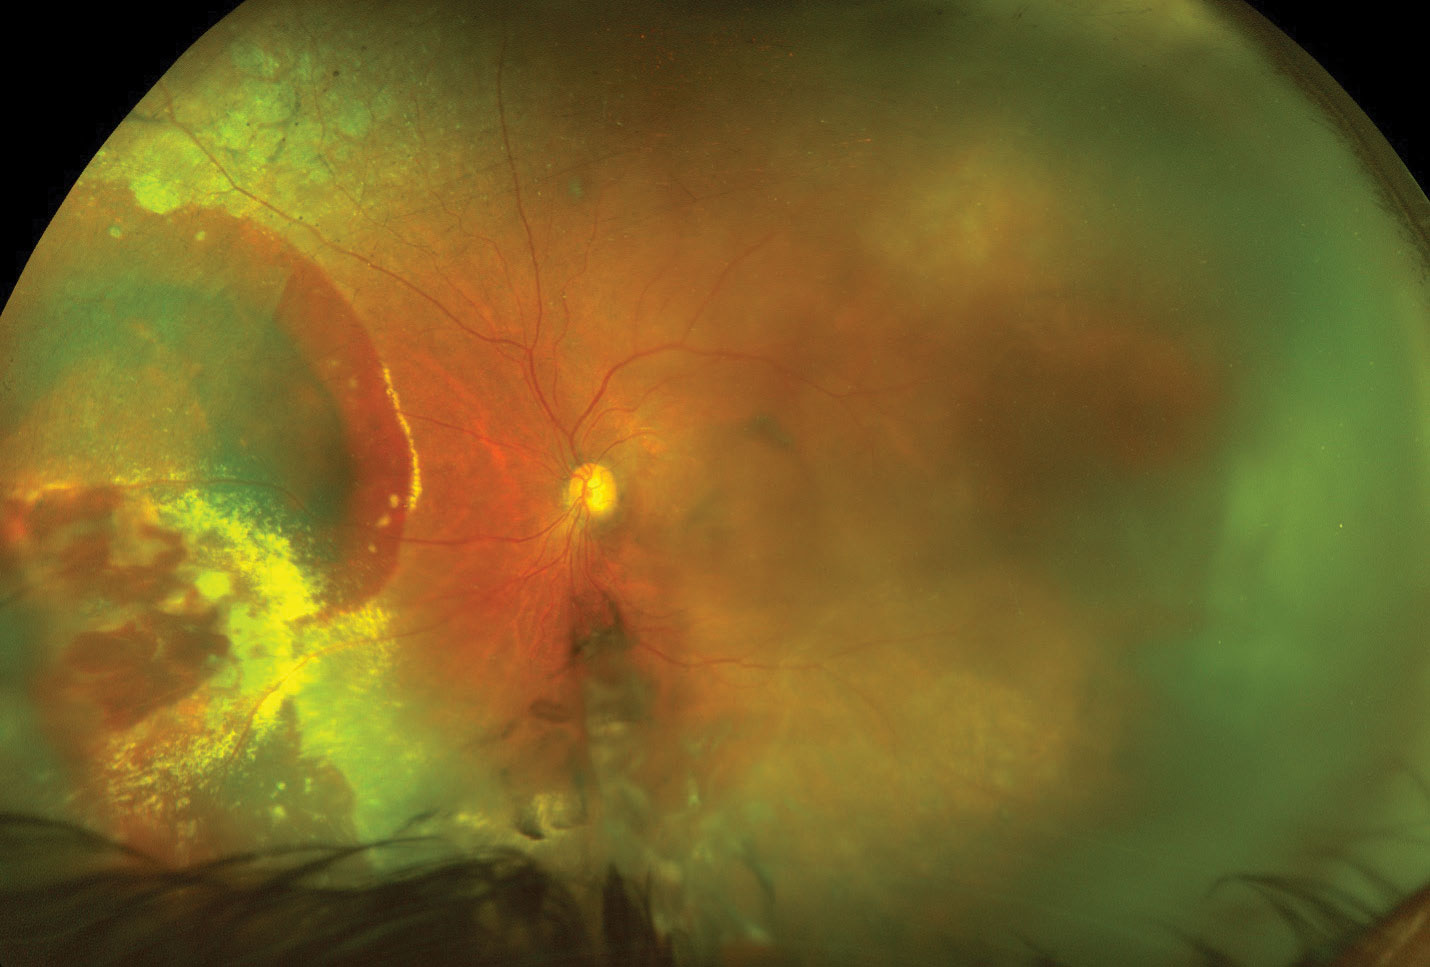 The left eye at the one-month follow-up after a single anti-VEGF intravitreal injection. The vitreous hemorrhage has cleared partially, allowing for better visualization of the nasal retina. You can still make out the extensive hemorrhaging and exudation from the lesion. The vision at this visit improved to 20/60.